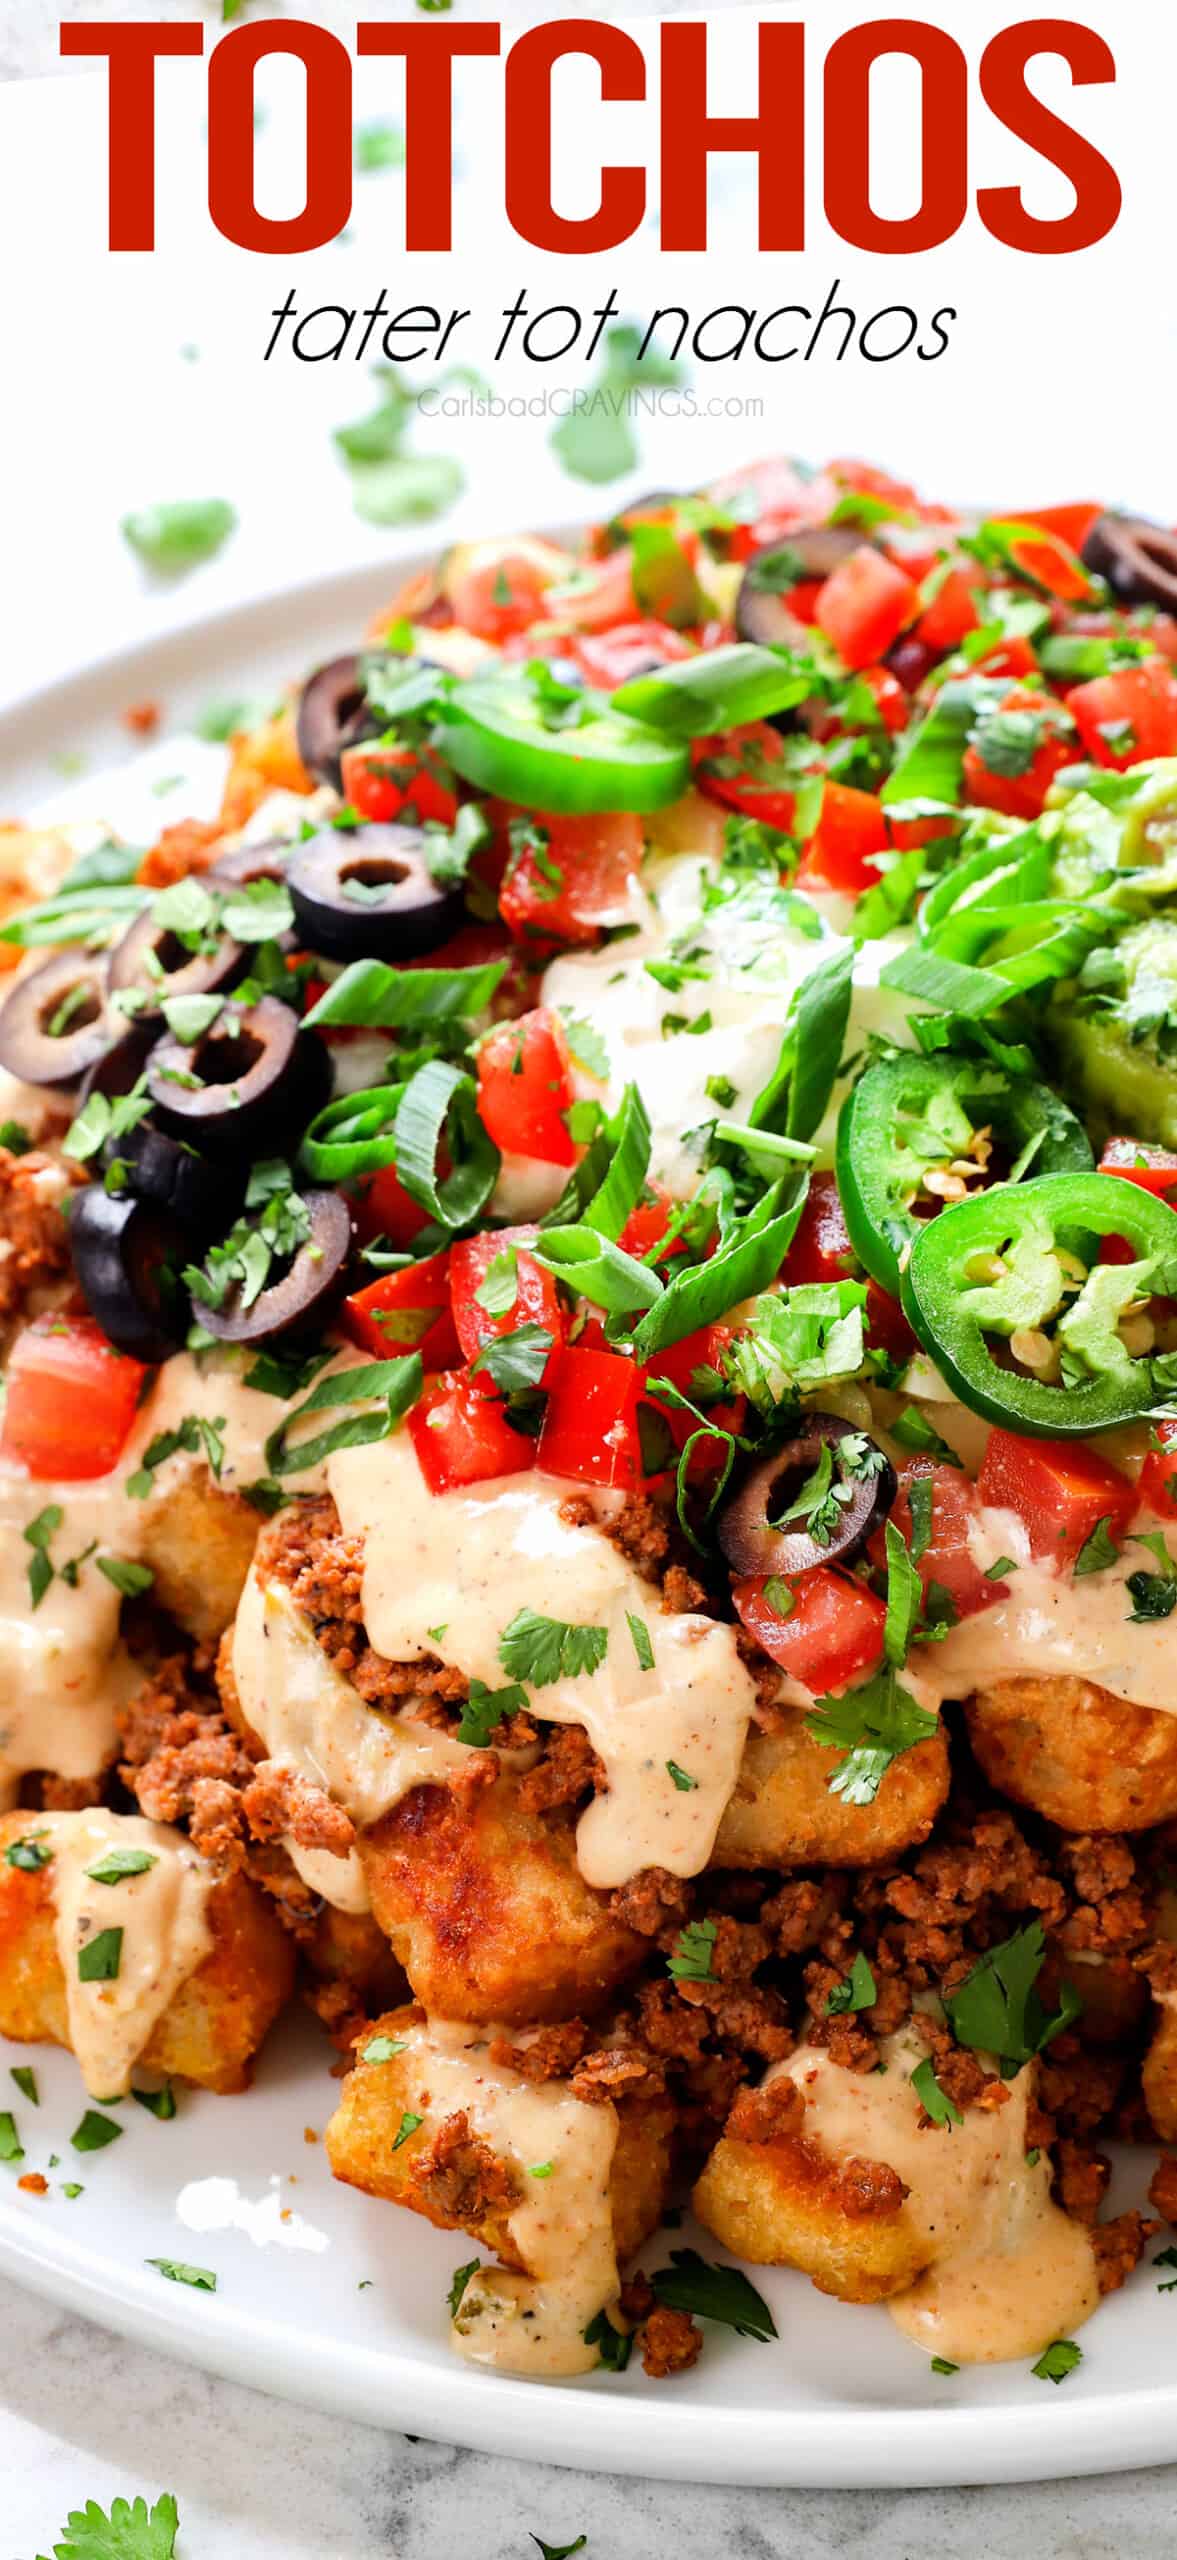 Totchos (tater tot nachos) topped with ground beef, cheese sauce, pico de gallo, olives and jalapenos